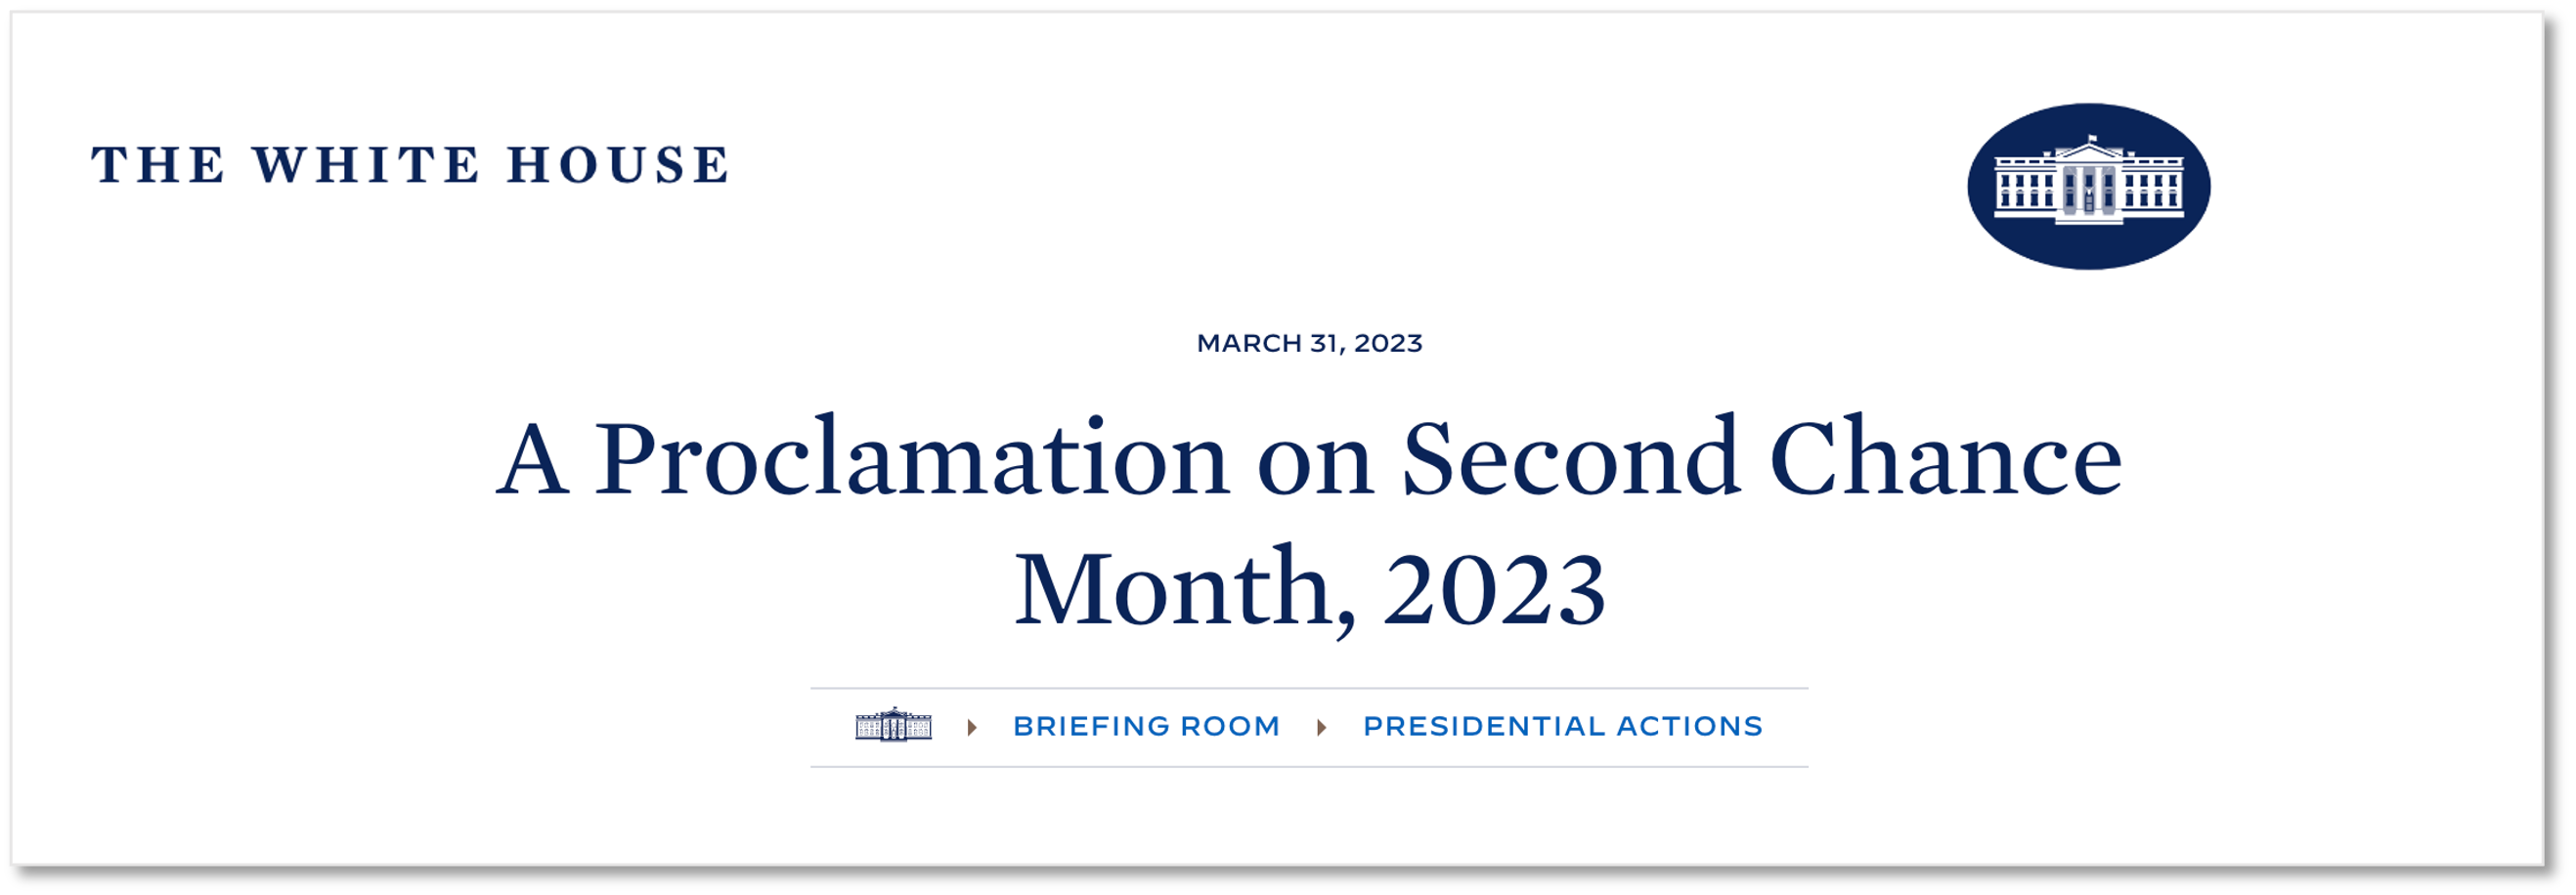 Second Chance Month 2023 Proclamation banner